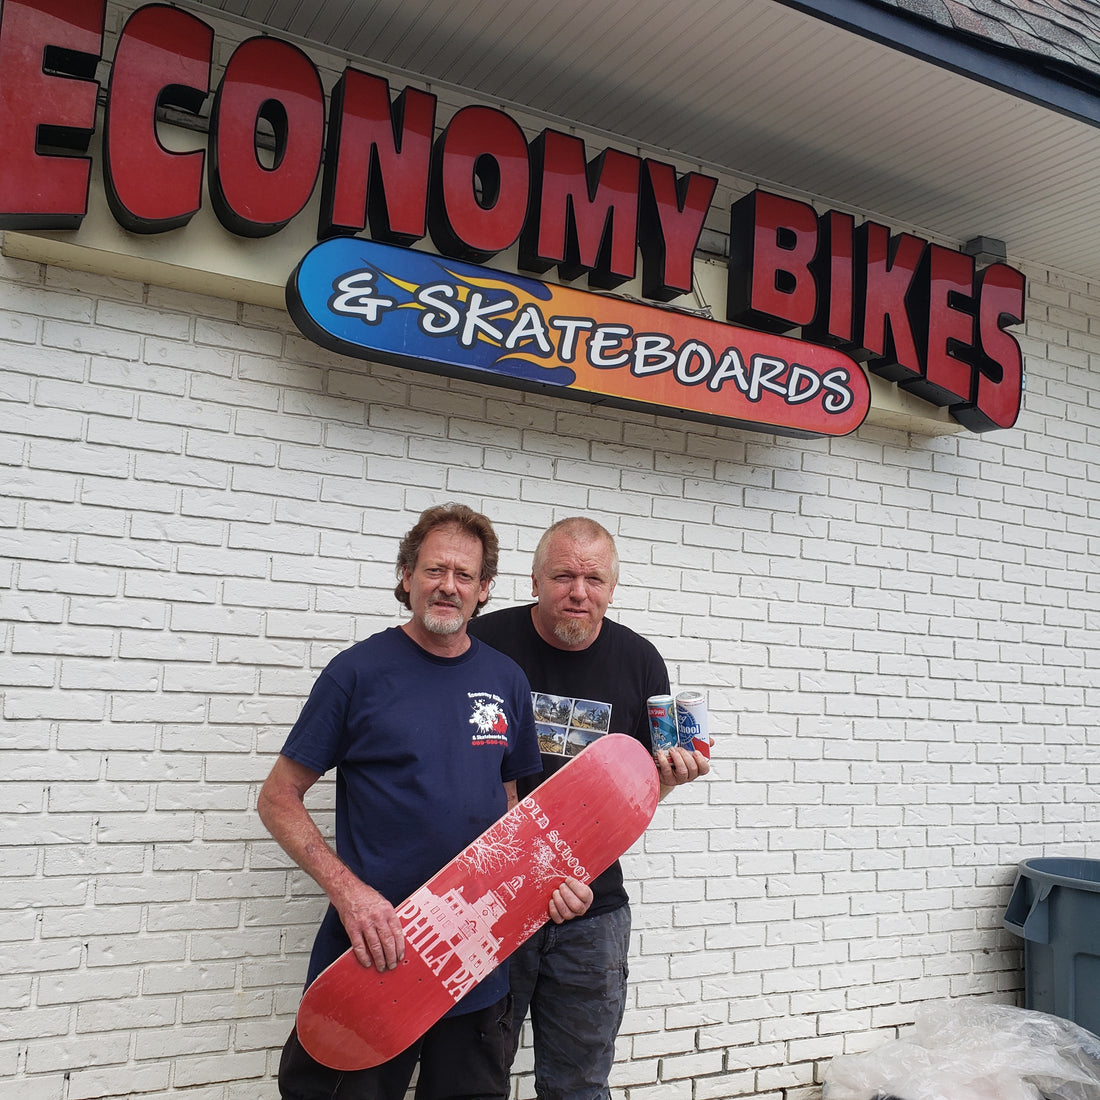 It was nice to see my old friend Charlie at Economy Bike & Skateboard Shop.